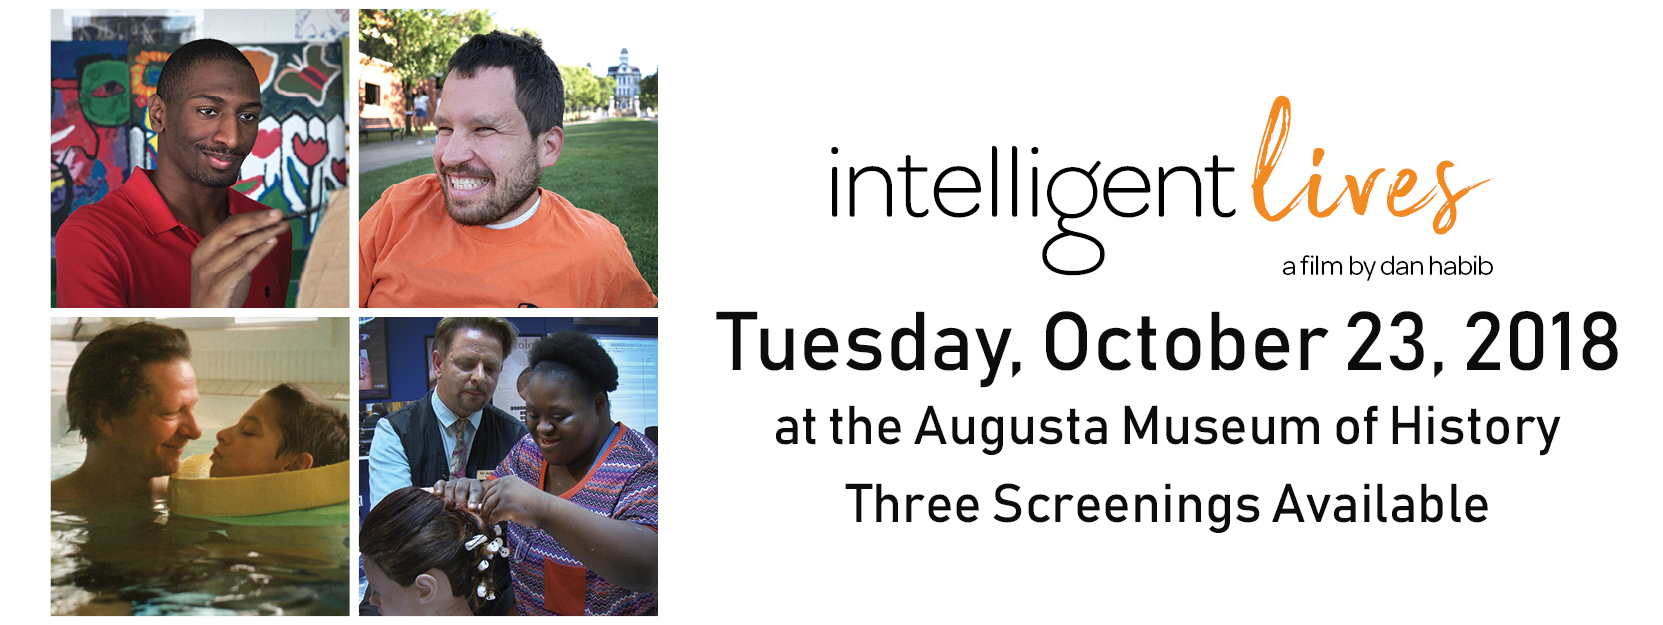 Header banner for Intelligent Lives: to the left is a series of four photos stacked into a square. The photos are stills from the film featuring young men and women. To the right is the Intelligent Lives logo with text below it that reads: Tuesday, October 23, 2018 at the Augusta Museum of History, Three Screenings Available